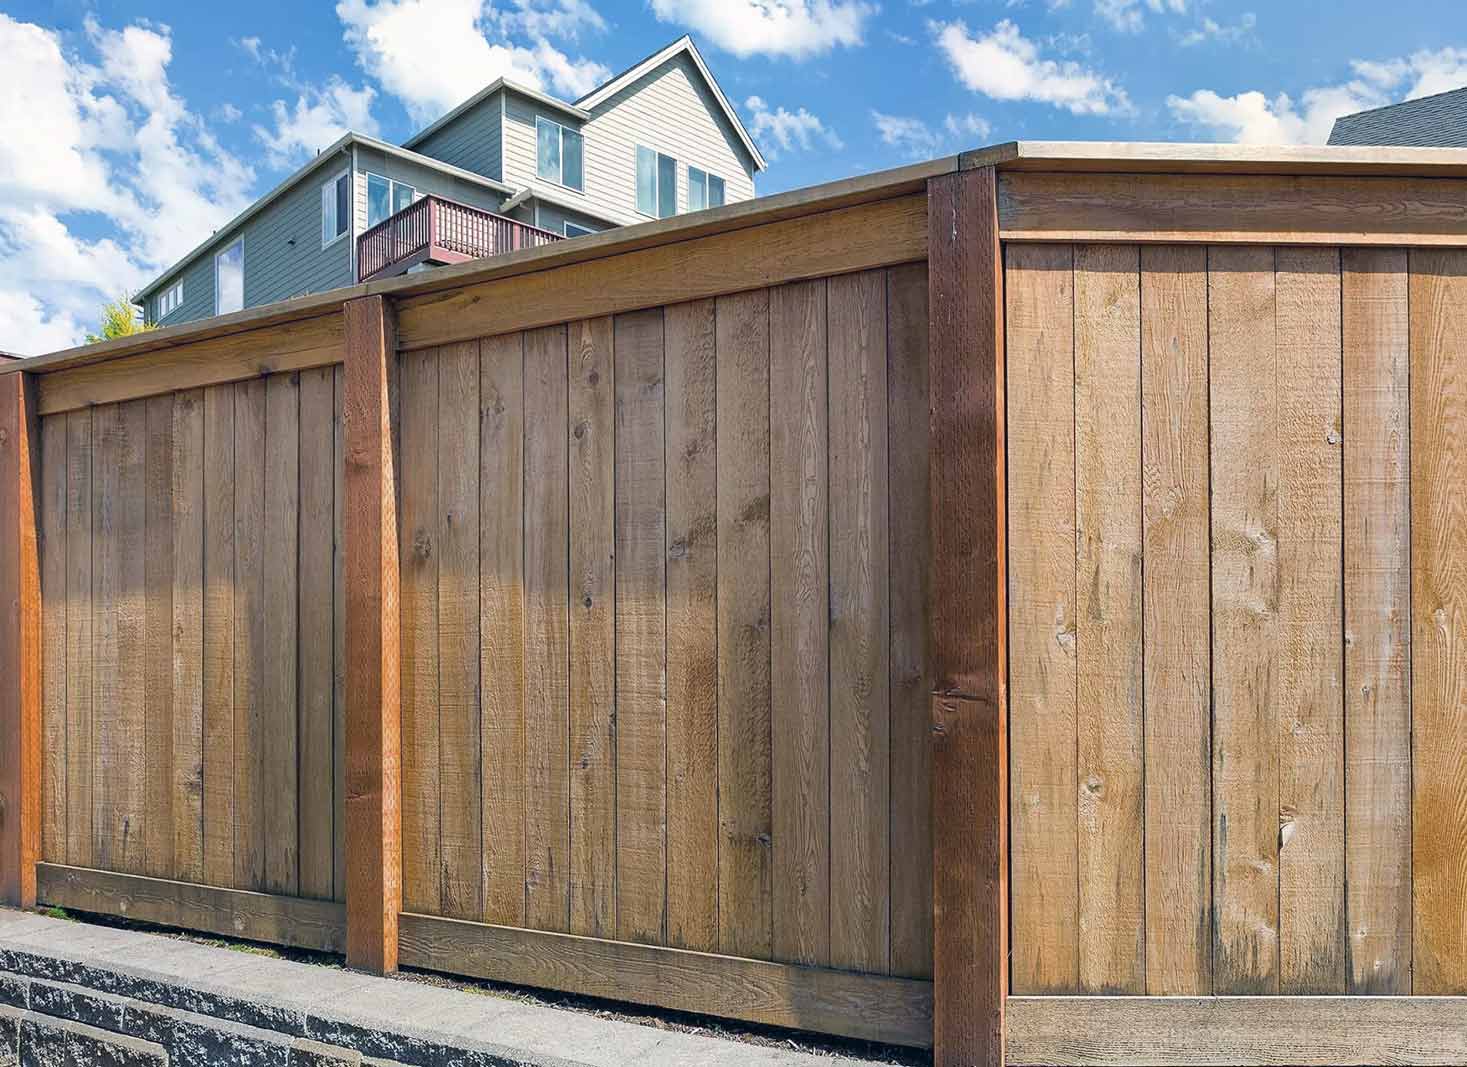 What is a wood fence good for